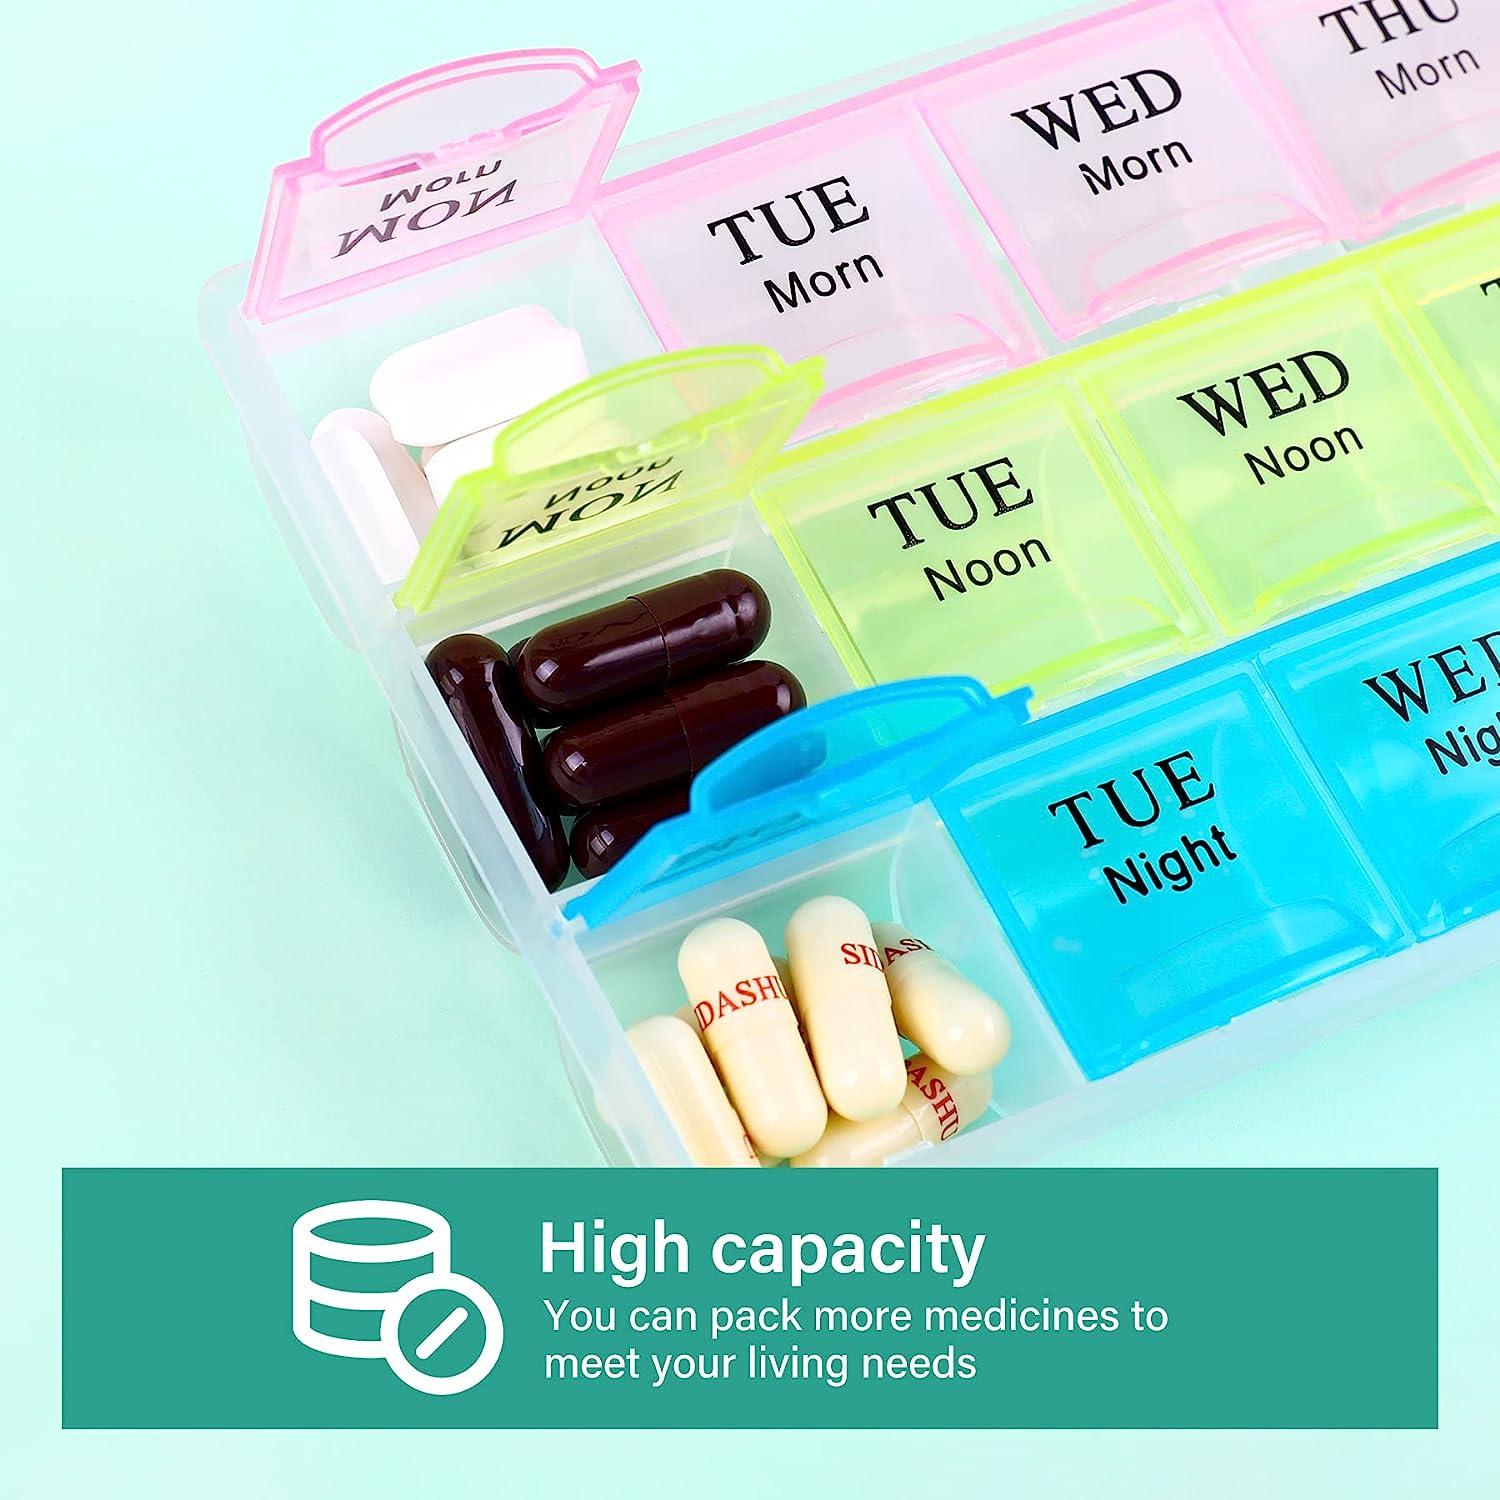 7 Day Pill Box Large Compartments Moisture-Proof Pill Case Medication  Reminder Portable Travel Container for Vitamins Fish Oil Compartments  Supplements - China Medicine Box Organizer, Pill Case